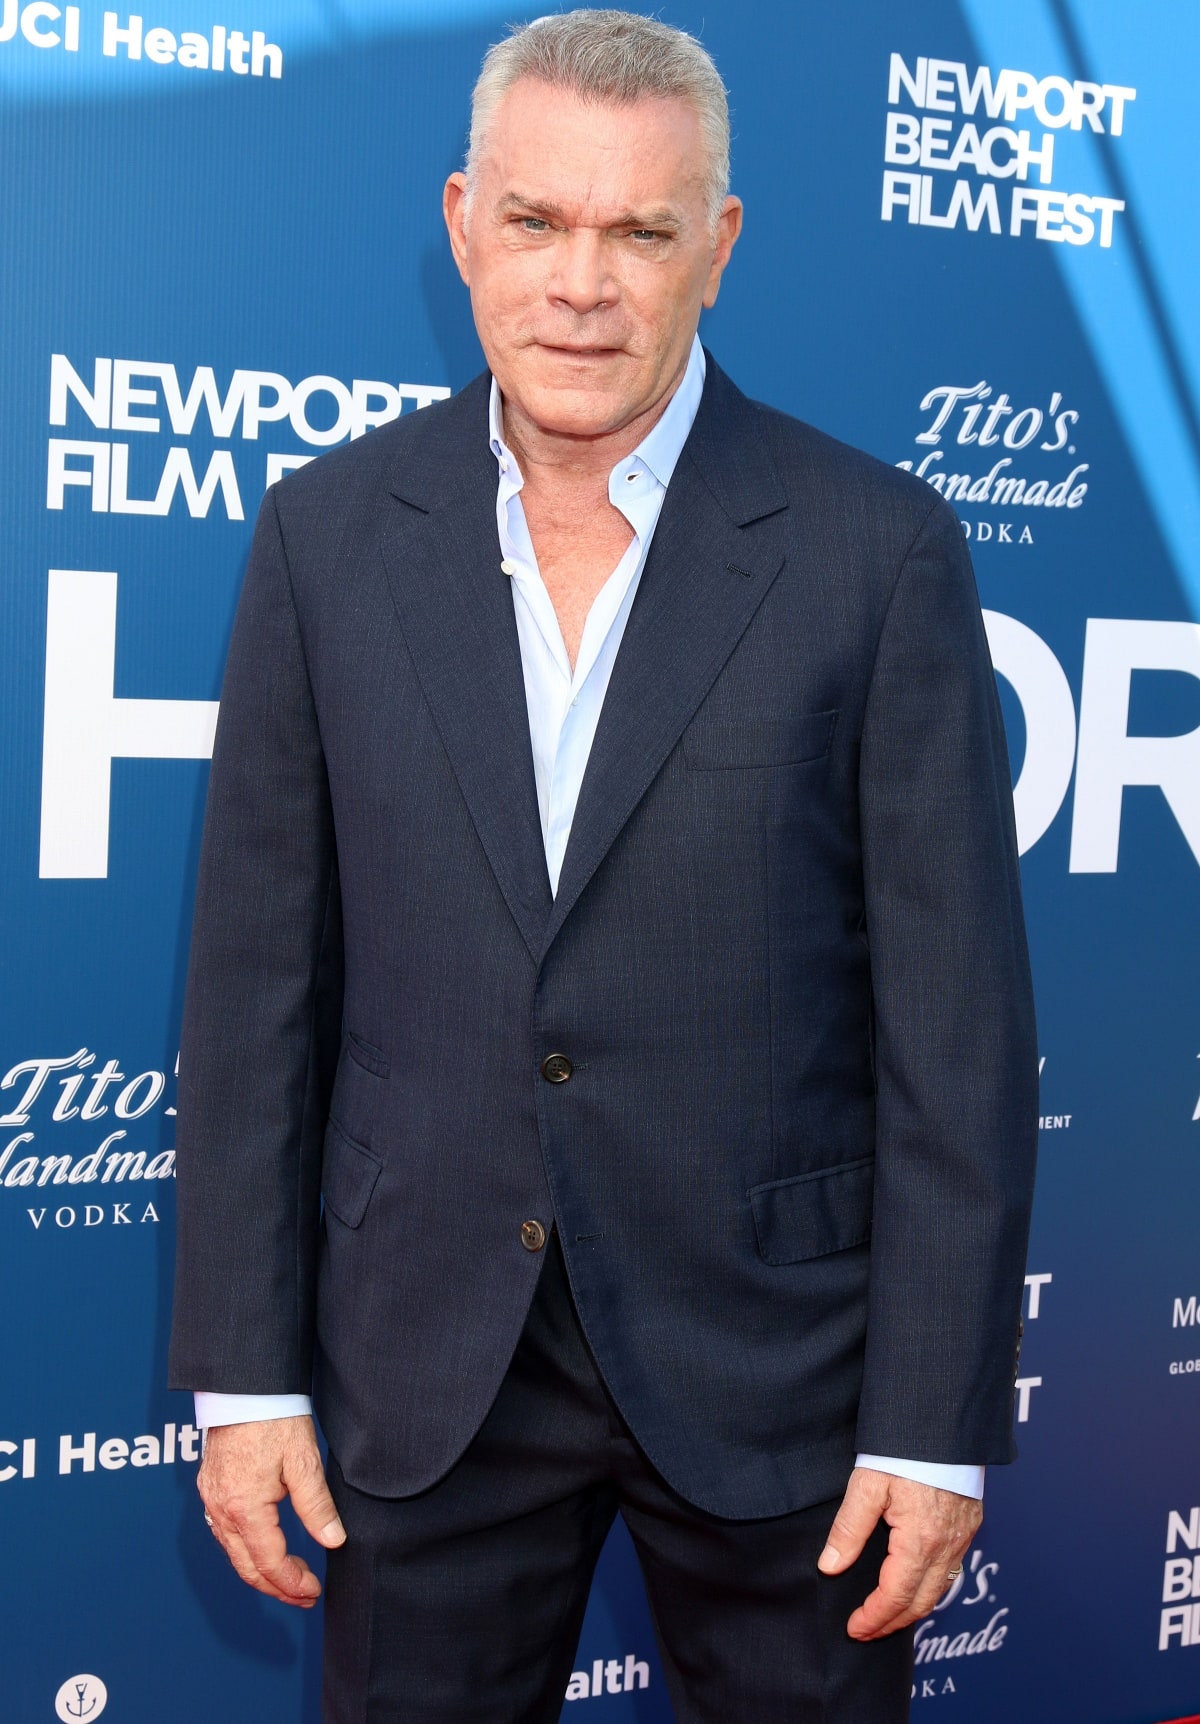 Ray Liotta attending the 22nd Annual Newport Beach Film Festival Presents Festival Honors & Variety’s 10 Actors to Watch event